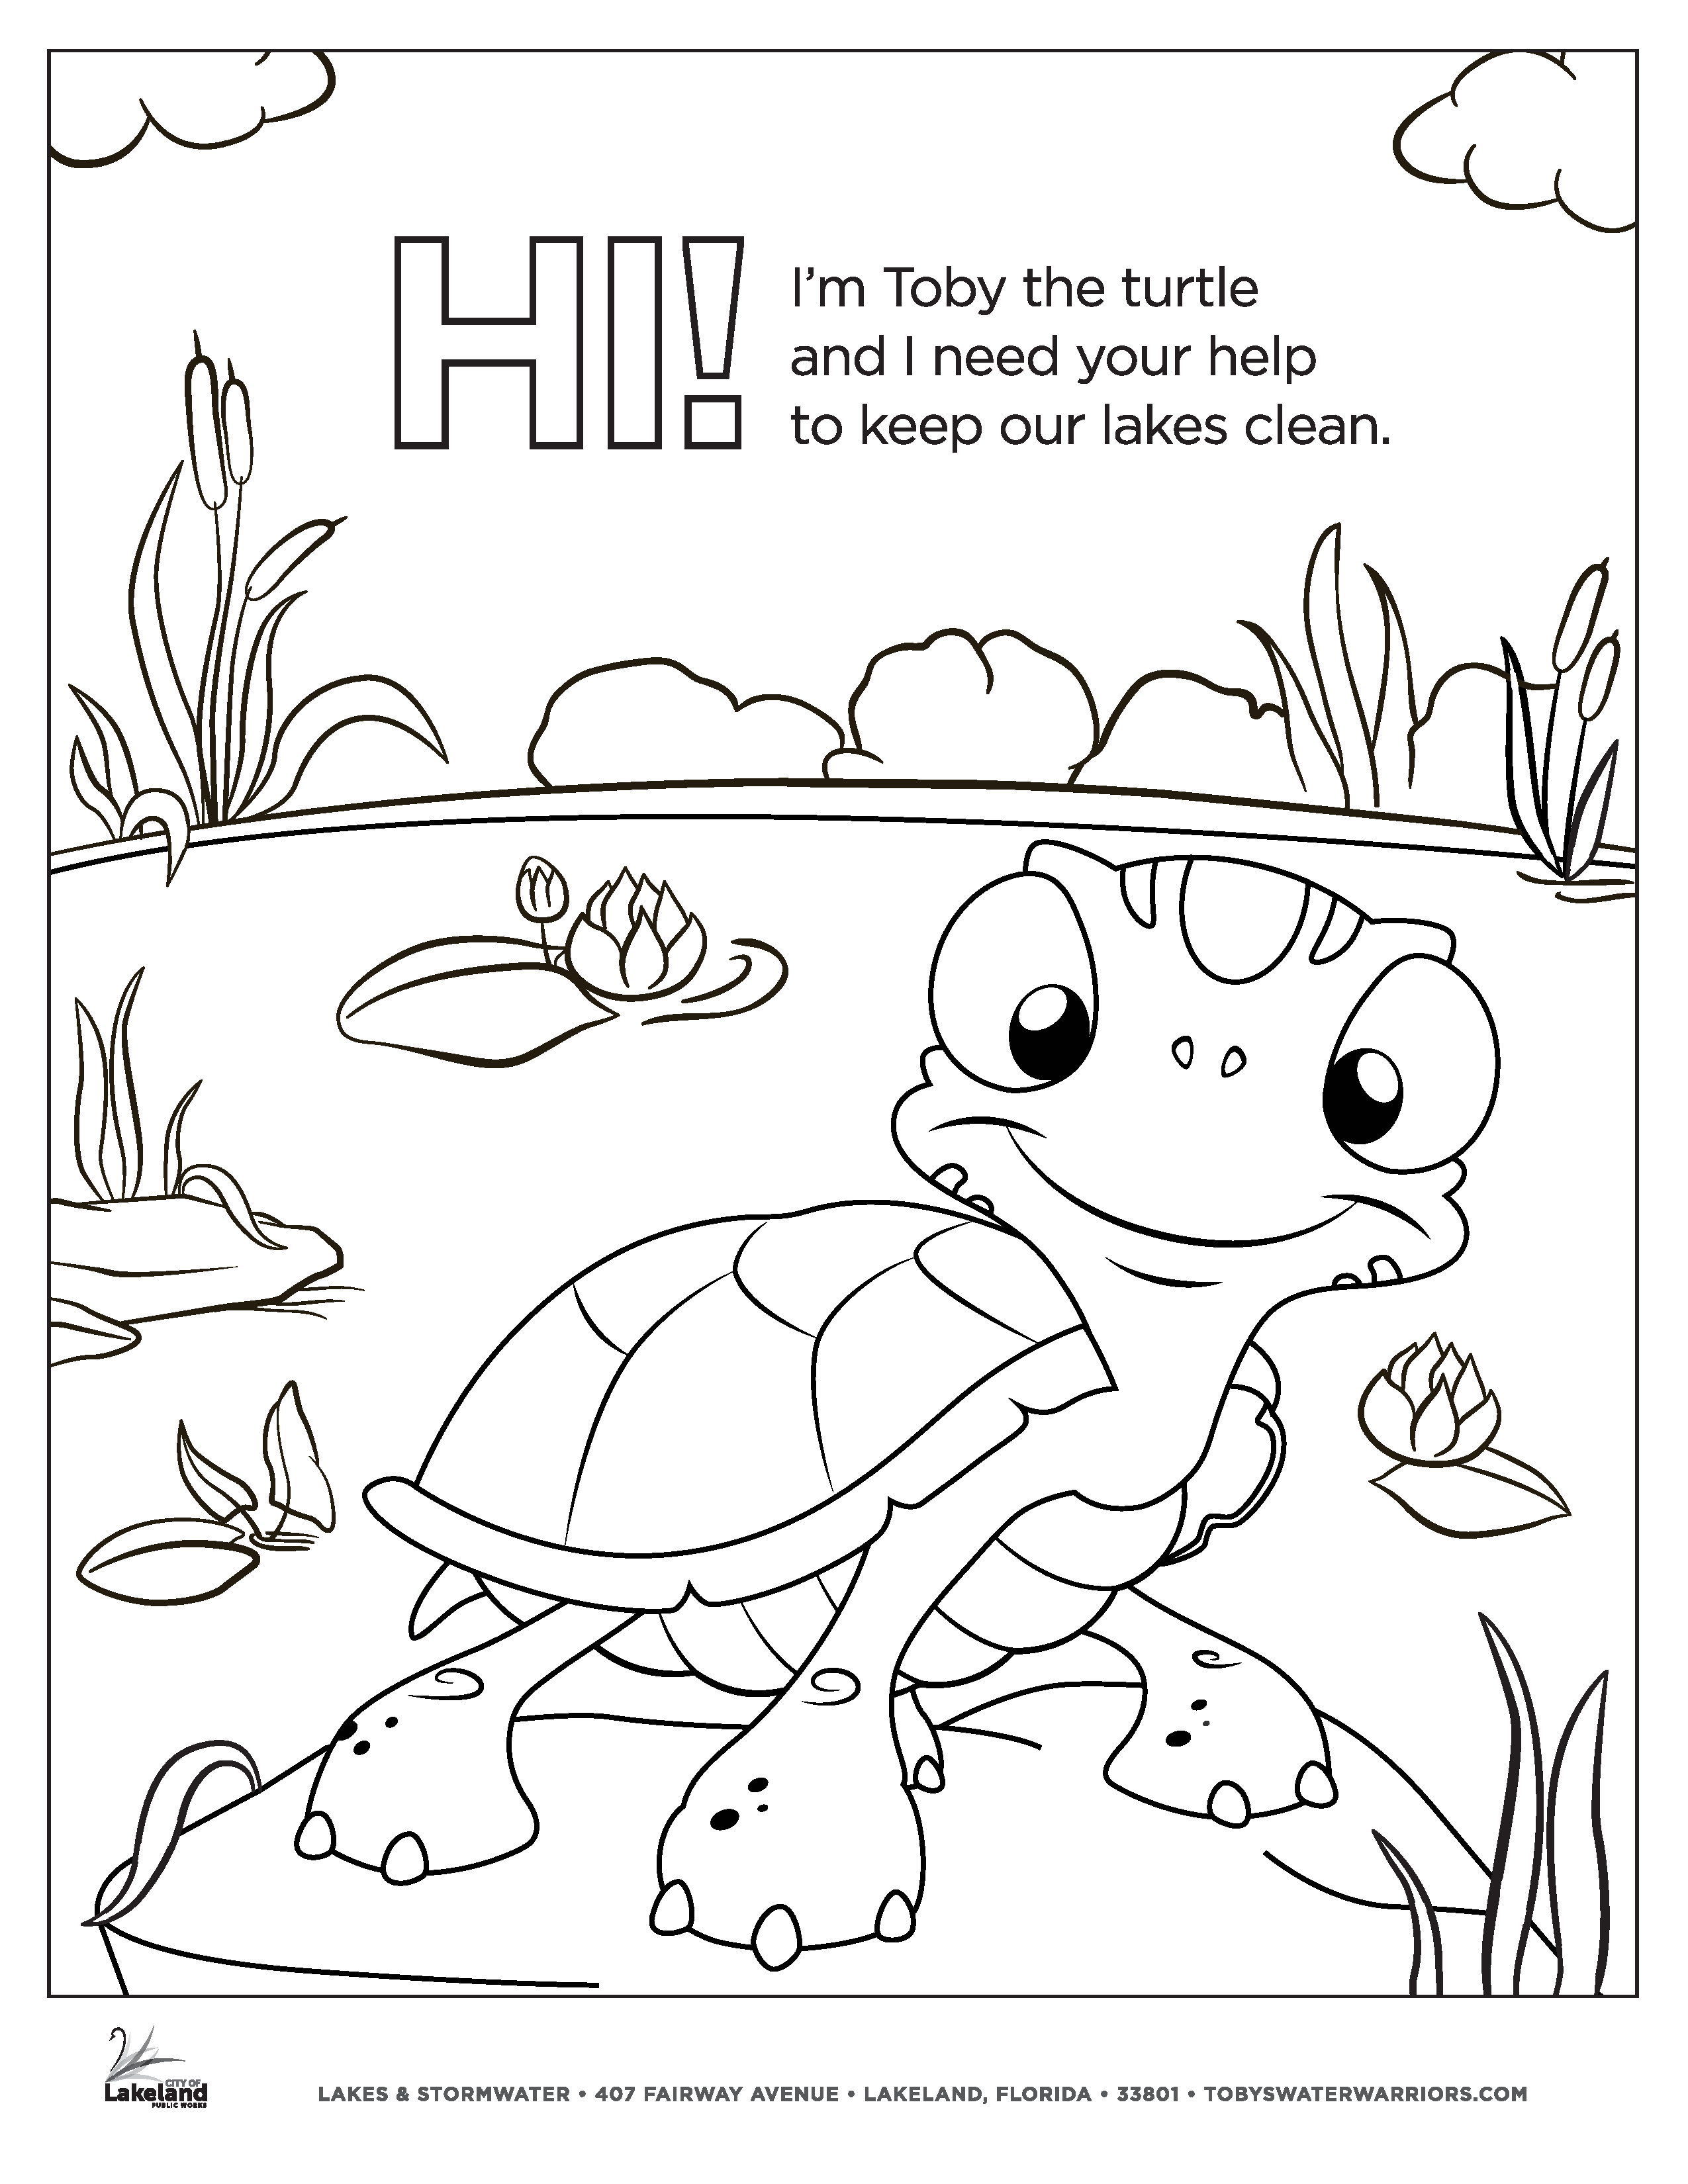 Coloring Pages City of Lakeland